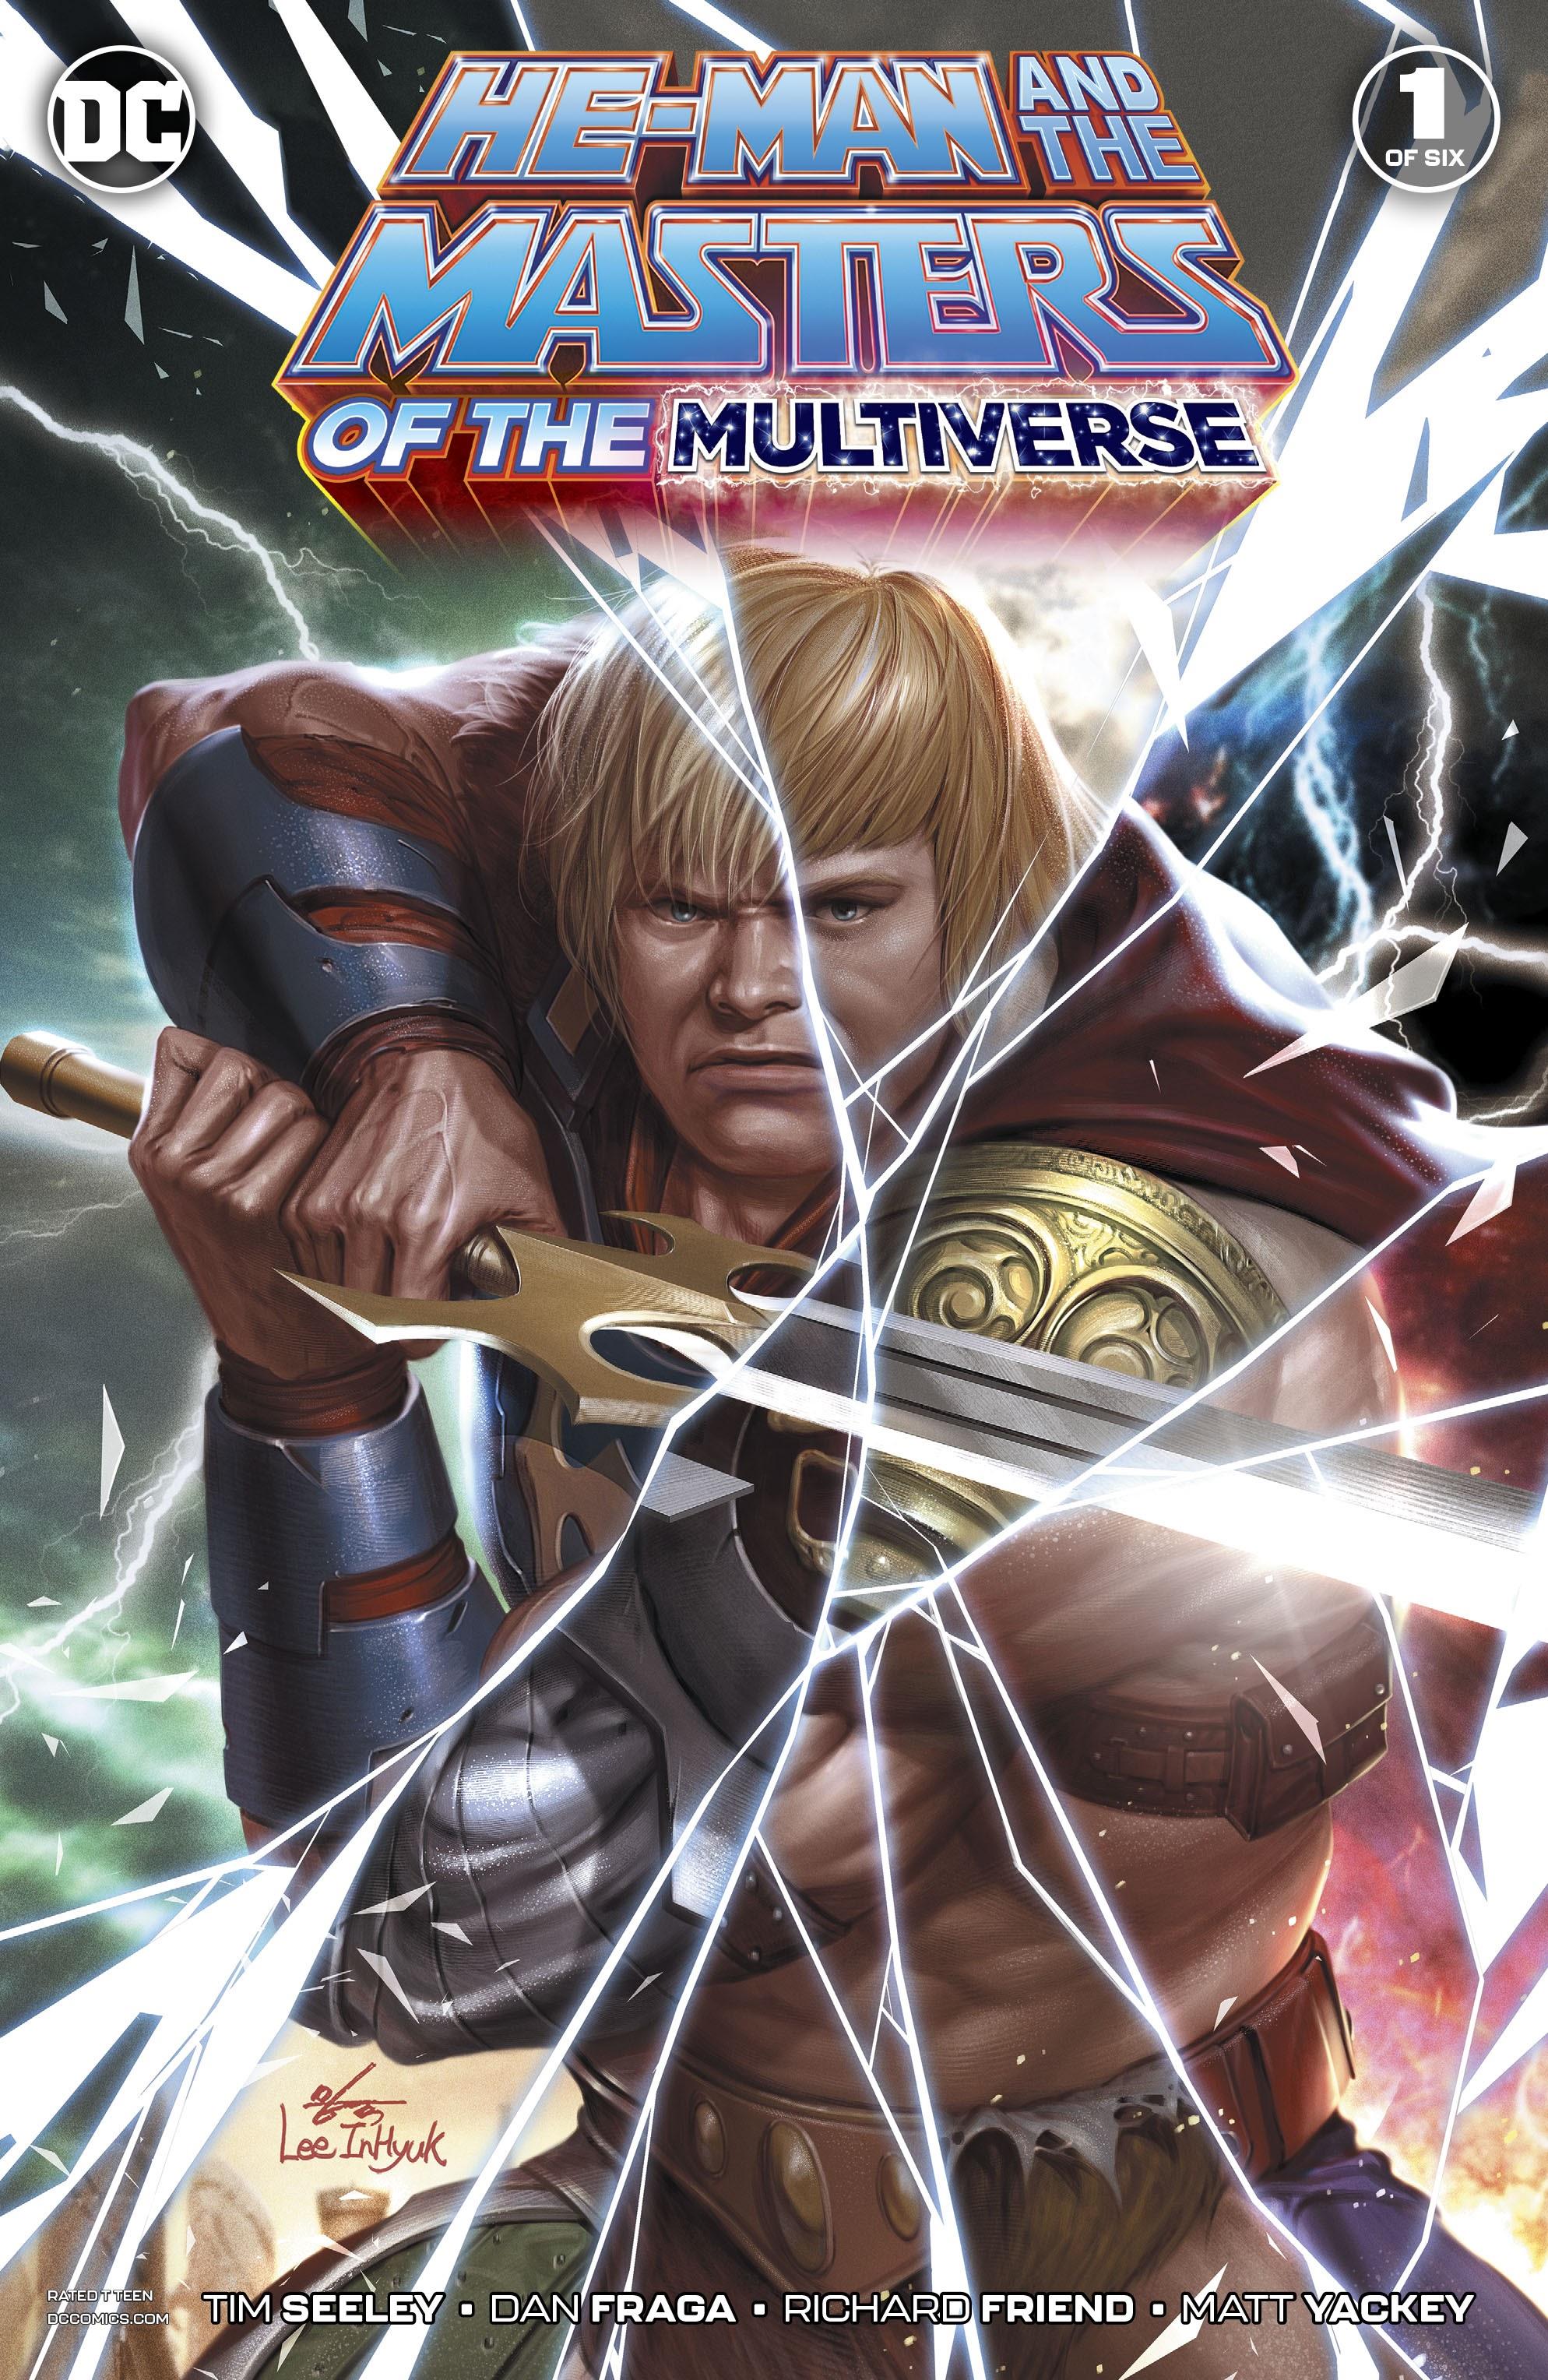 He-Man and the Masters of the Multiverse Vol. 1 #1